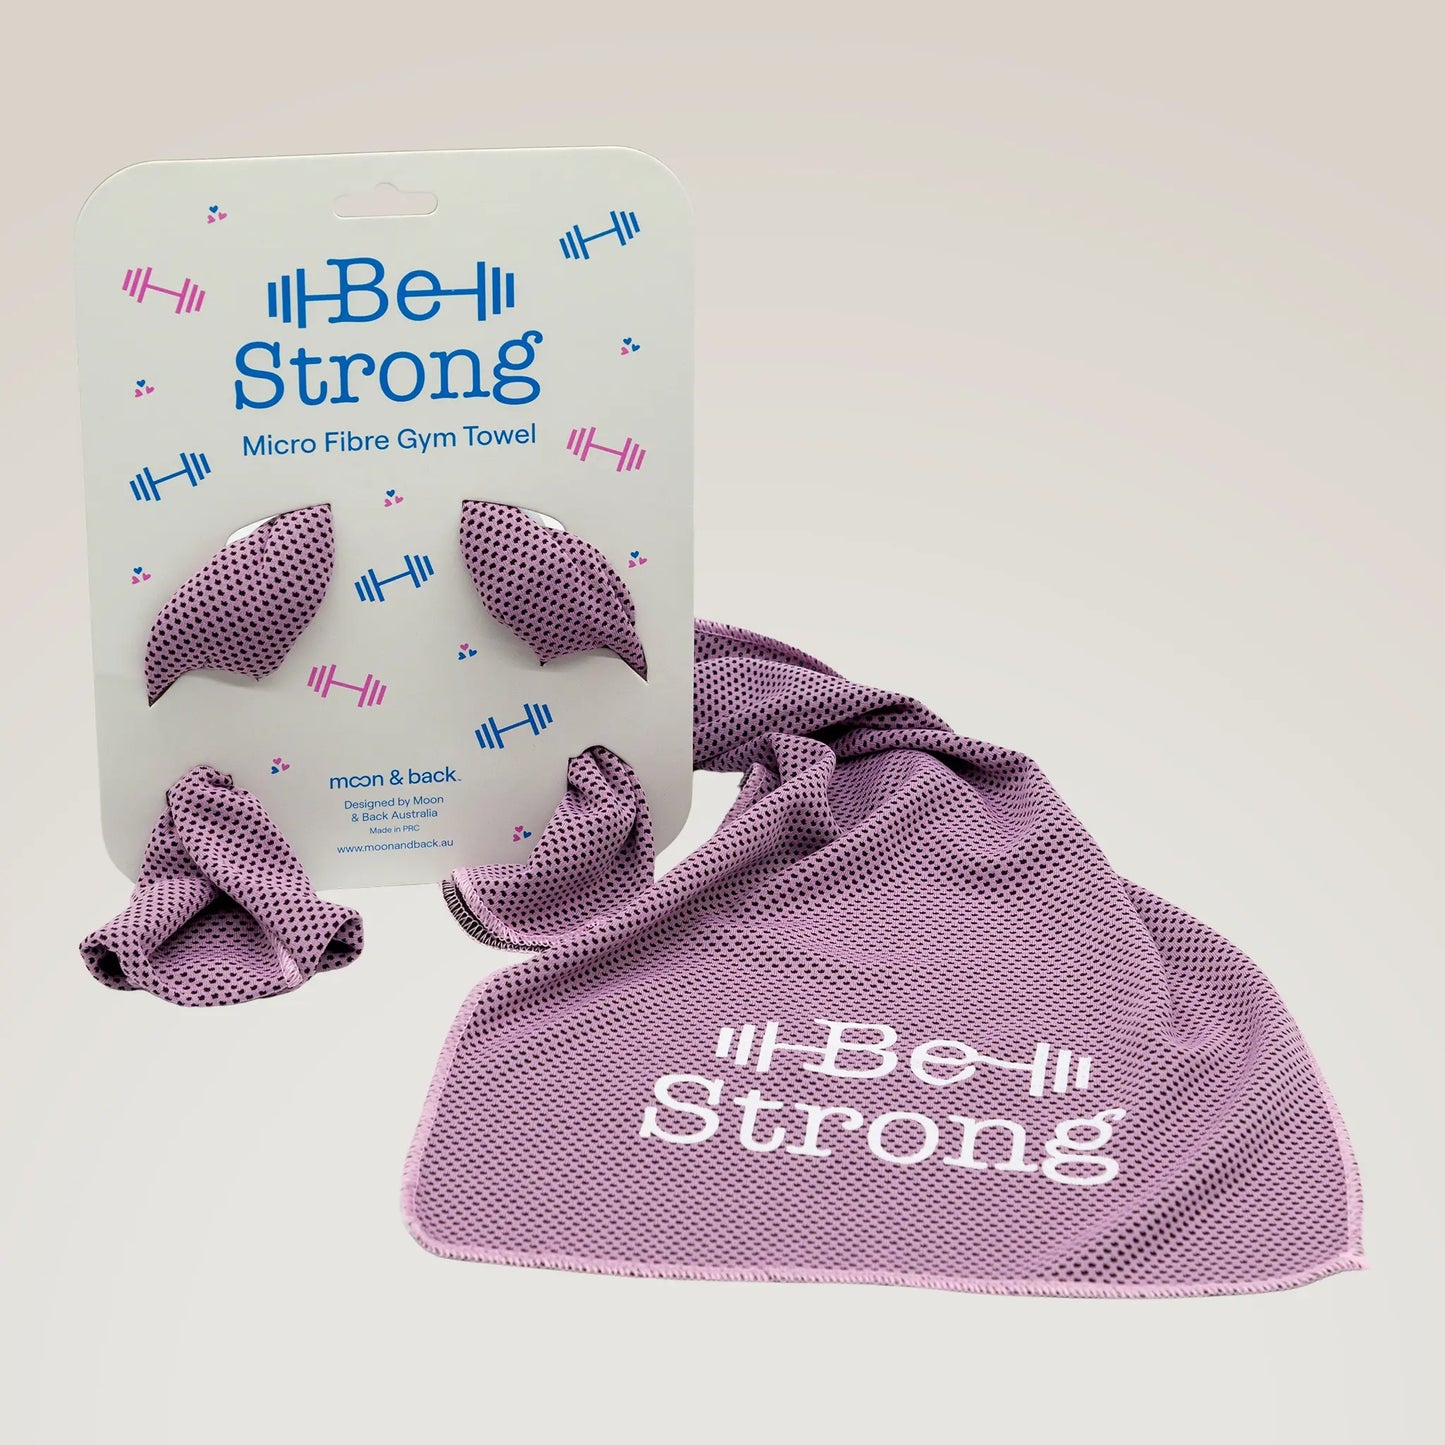 Be Strong Gym Towel